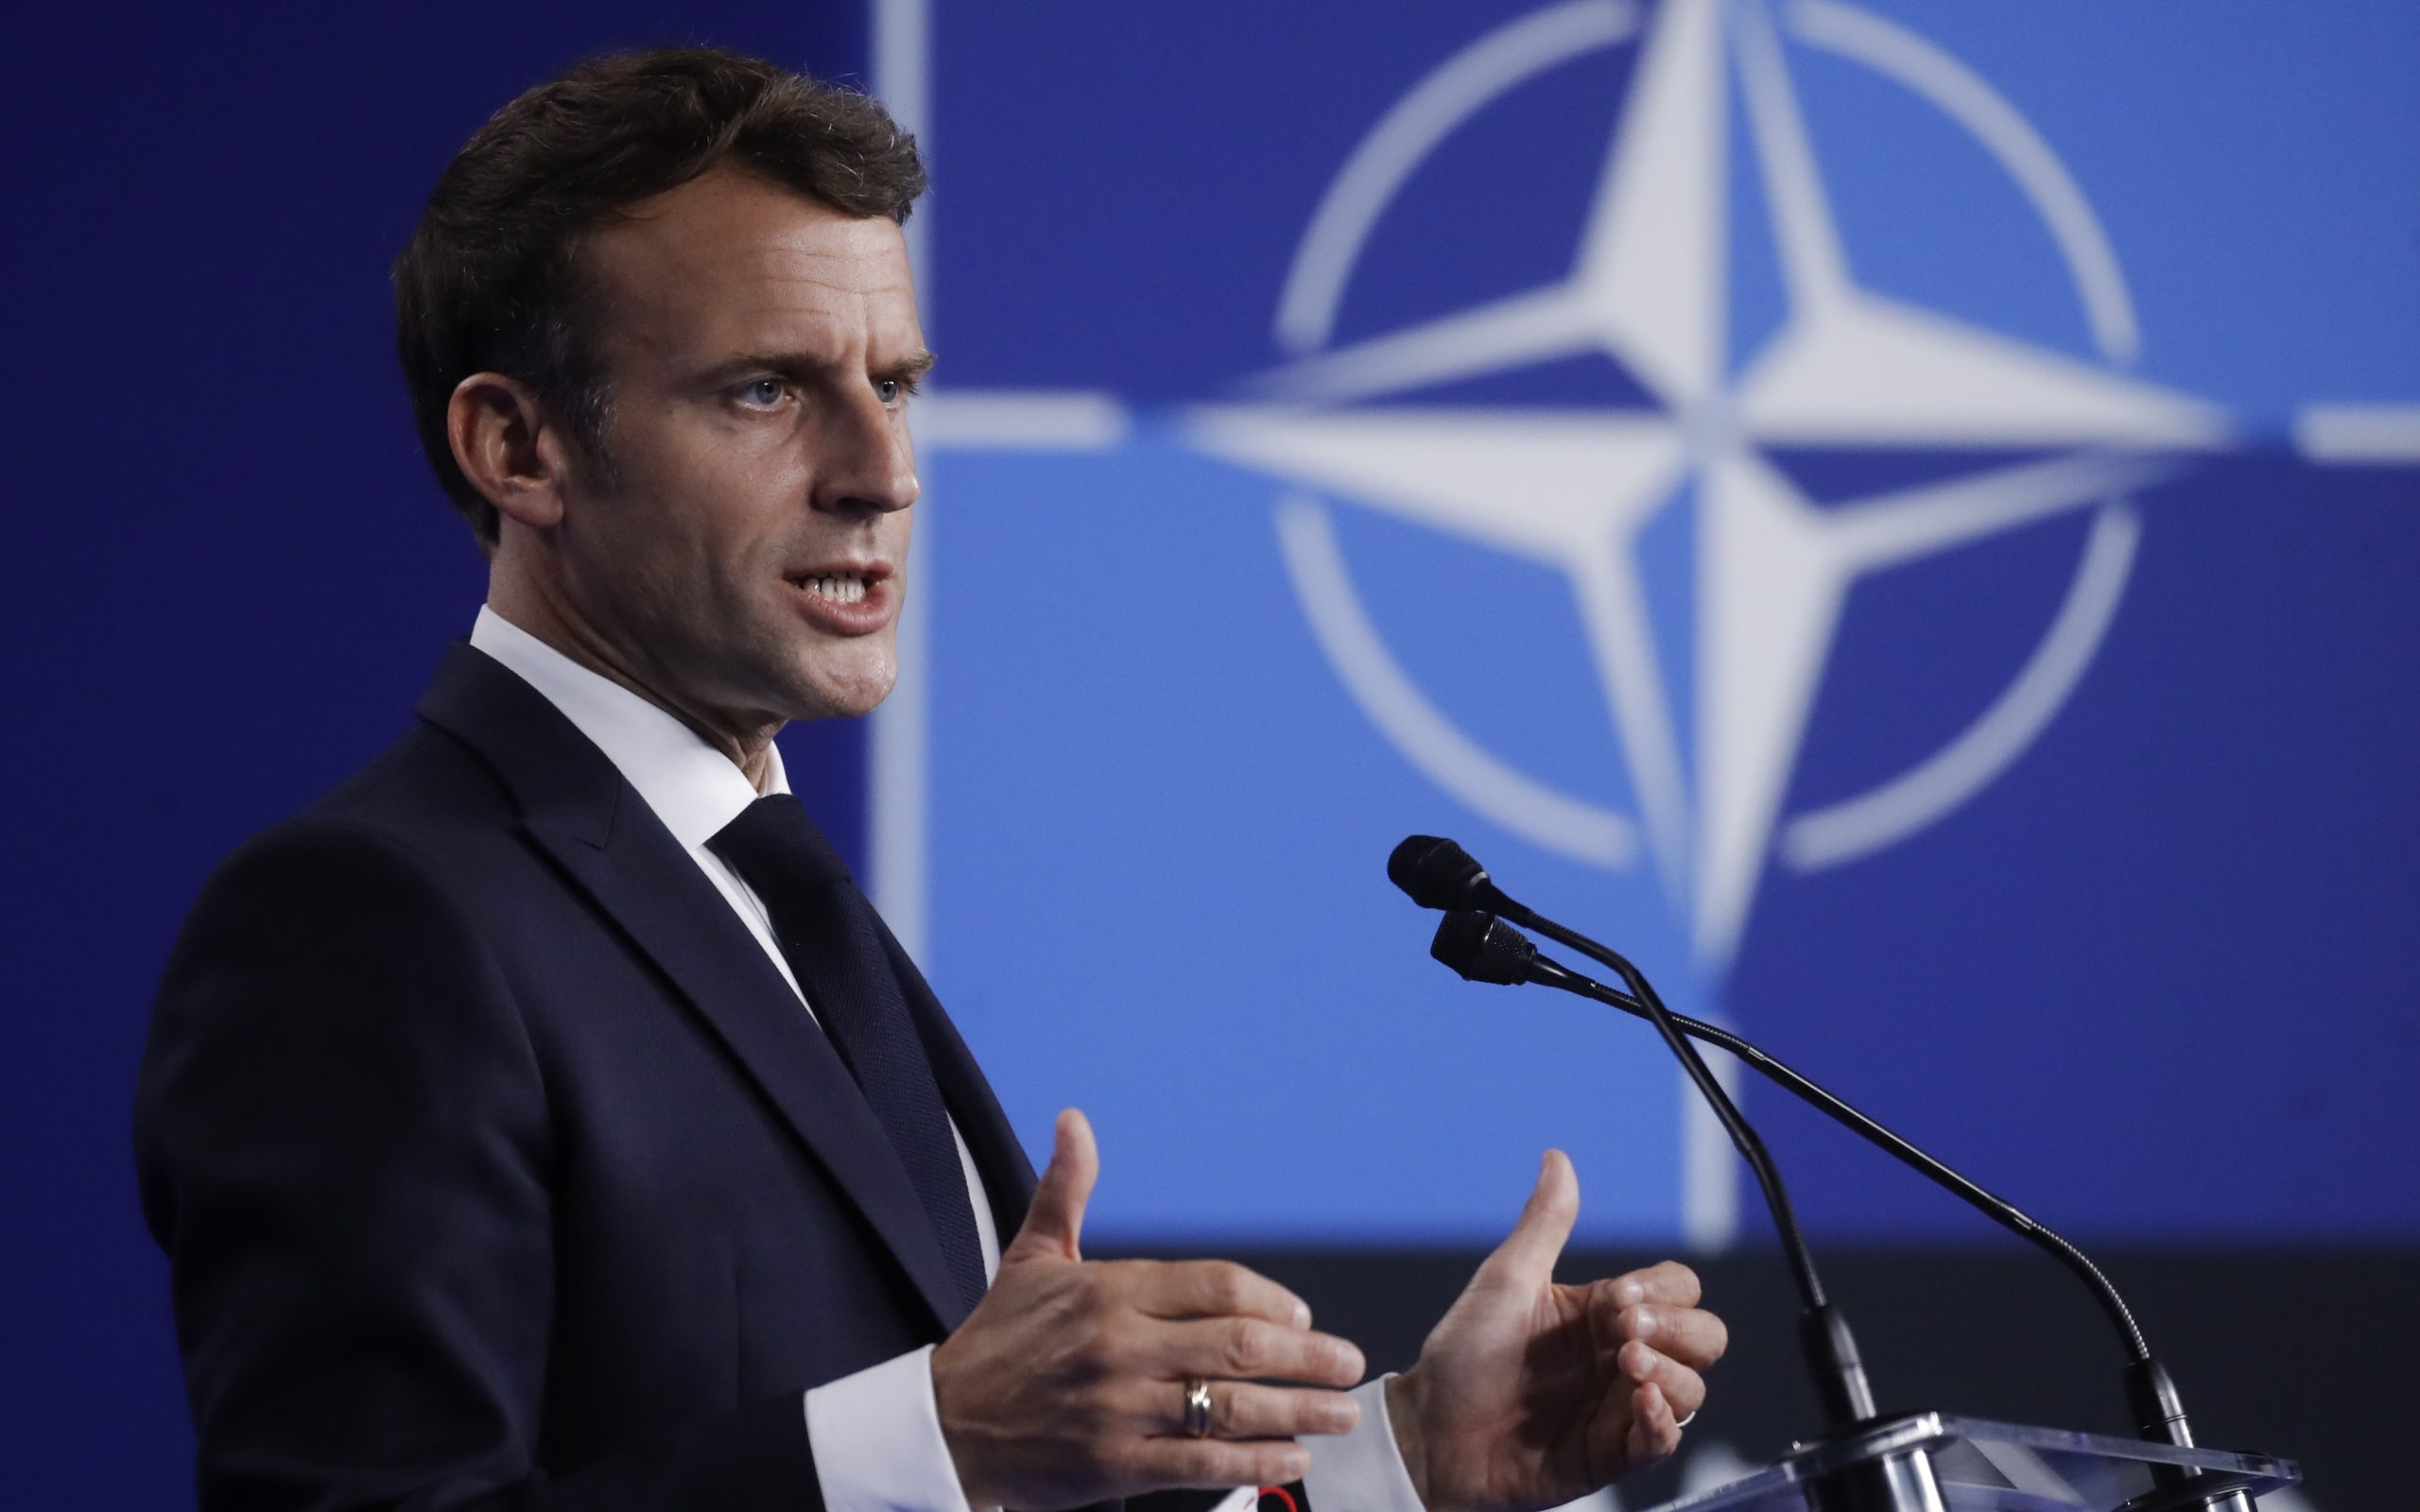 epa09270987 French President Emmanuel Macron gives a press conference during  a NATO summit at the North Atlantic Treaty Organization (NATO) headquarters in Brussels, Belgium, 14 June 2021. The 30-nation alliance hopes to reaffirm its unity and discuss increasingly tense relations with China and Russia, as the organization pulls its troops out after 18 years in Afghanistan.  EPA/OLIVIER HOSLET / POOL